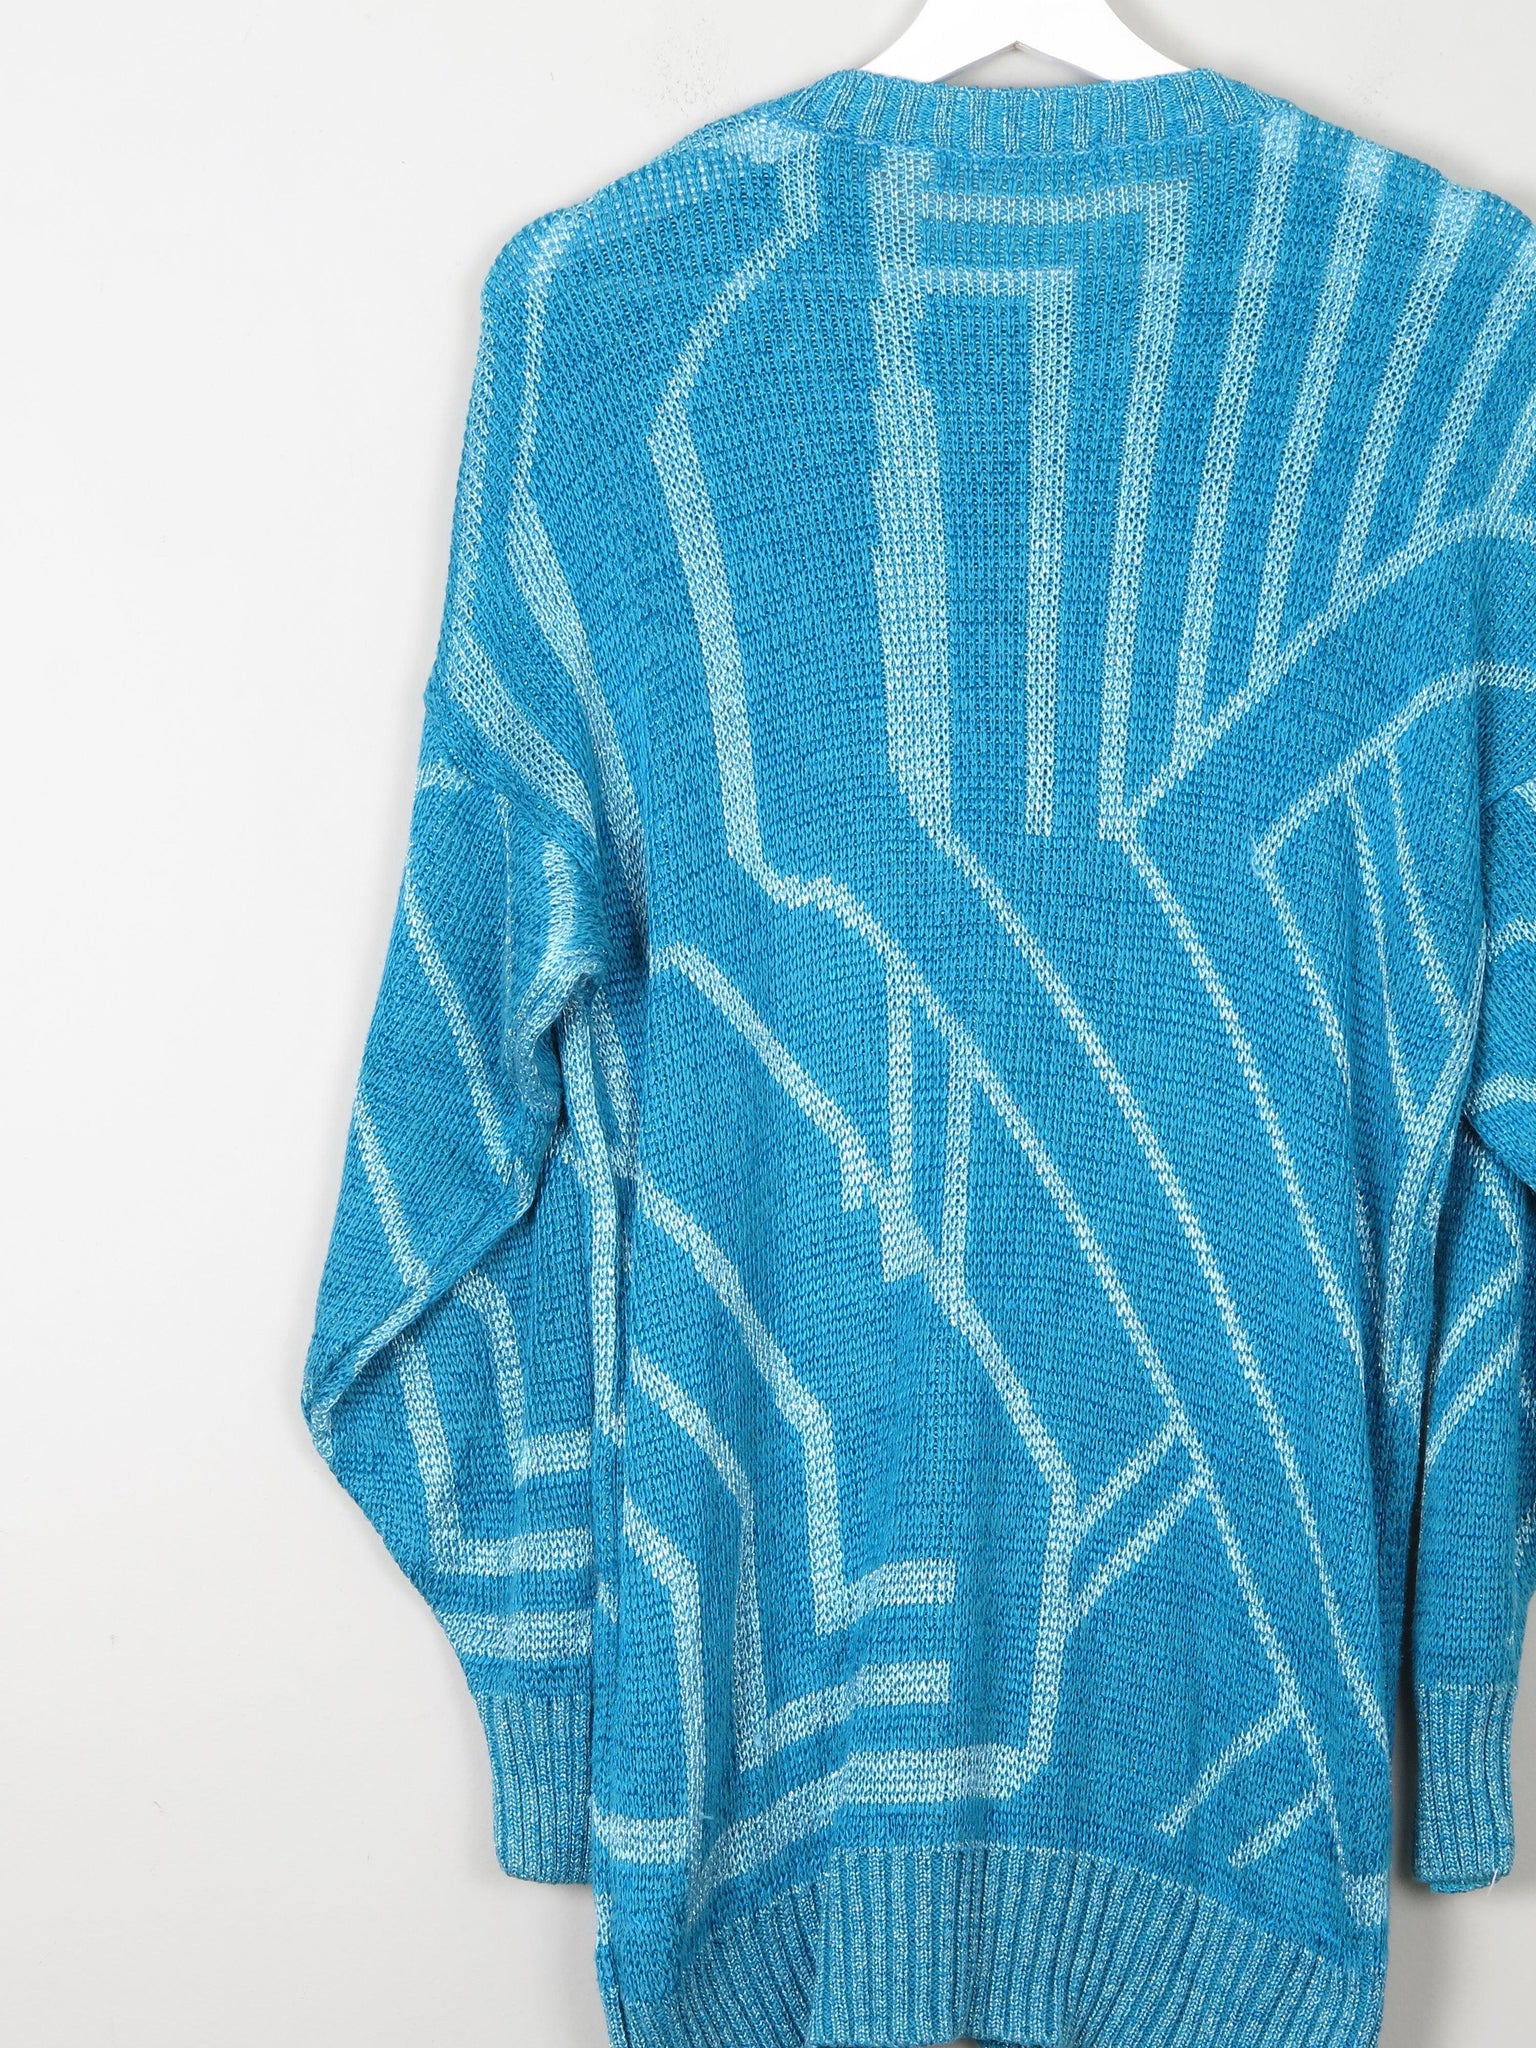 Women's Turquoise Graphic Print Cotton Jumper S/M - The Harlequin